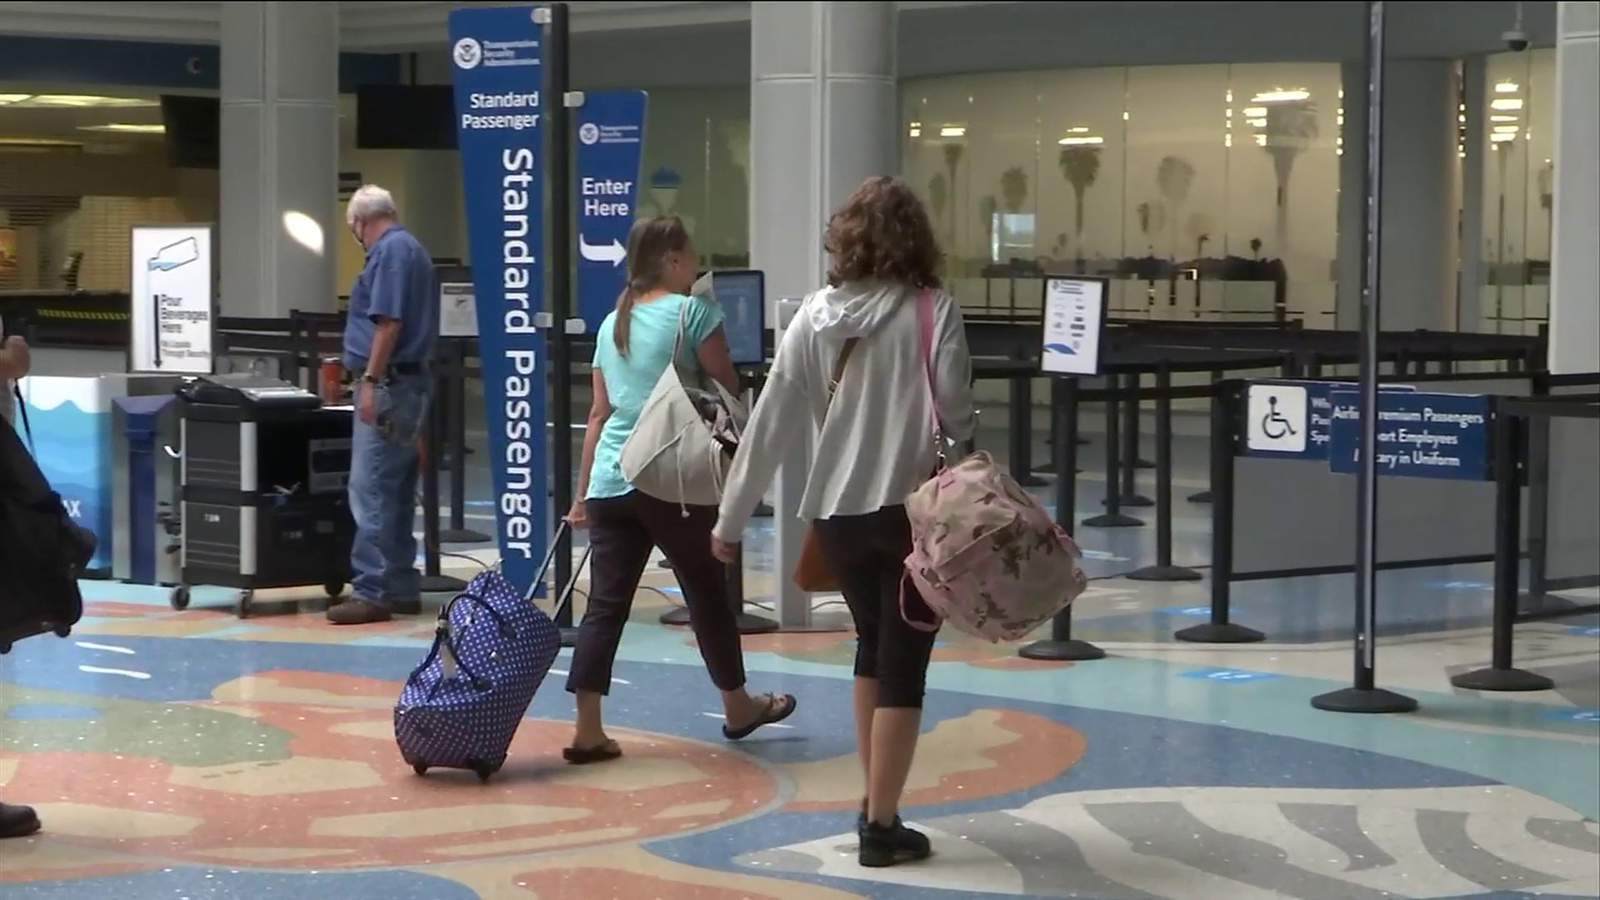 Planning to travel soon? The changes you can expect at JAX airport